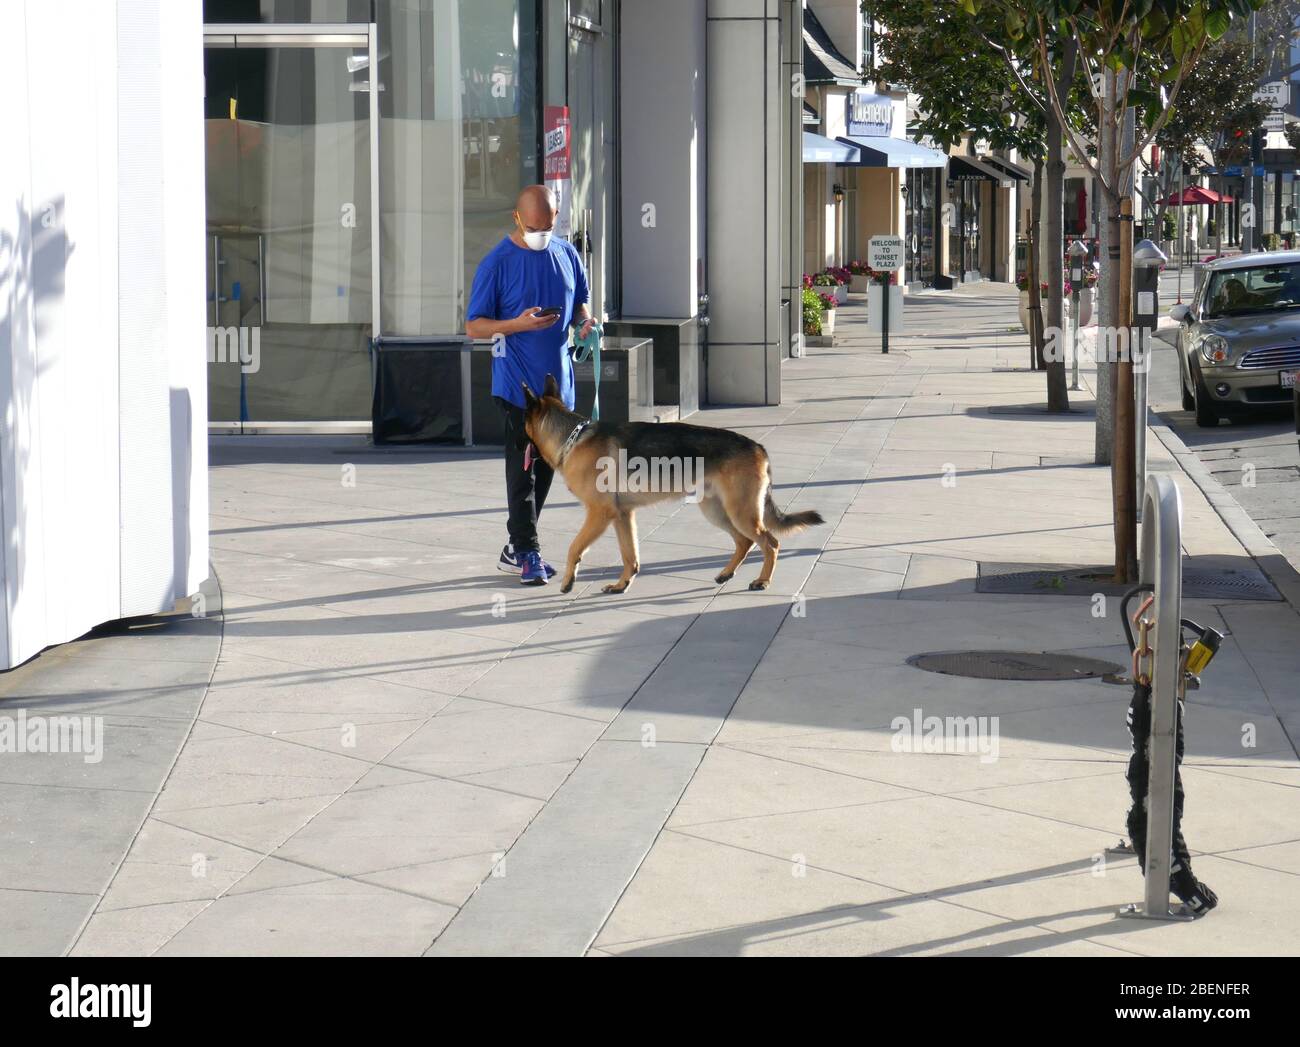 Los Angeles, California, USA 14th April 2020 A general view of atmosphere of man with face mask walking dog on street due to coronavirus covid-19 outbreak and social distancing and Stay At Home on April 14, 2020 in Los Angeles, California, USA. Photo by Barry King/Alamy Stock Photo Stock Photo